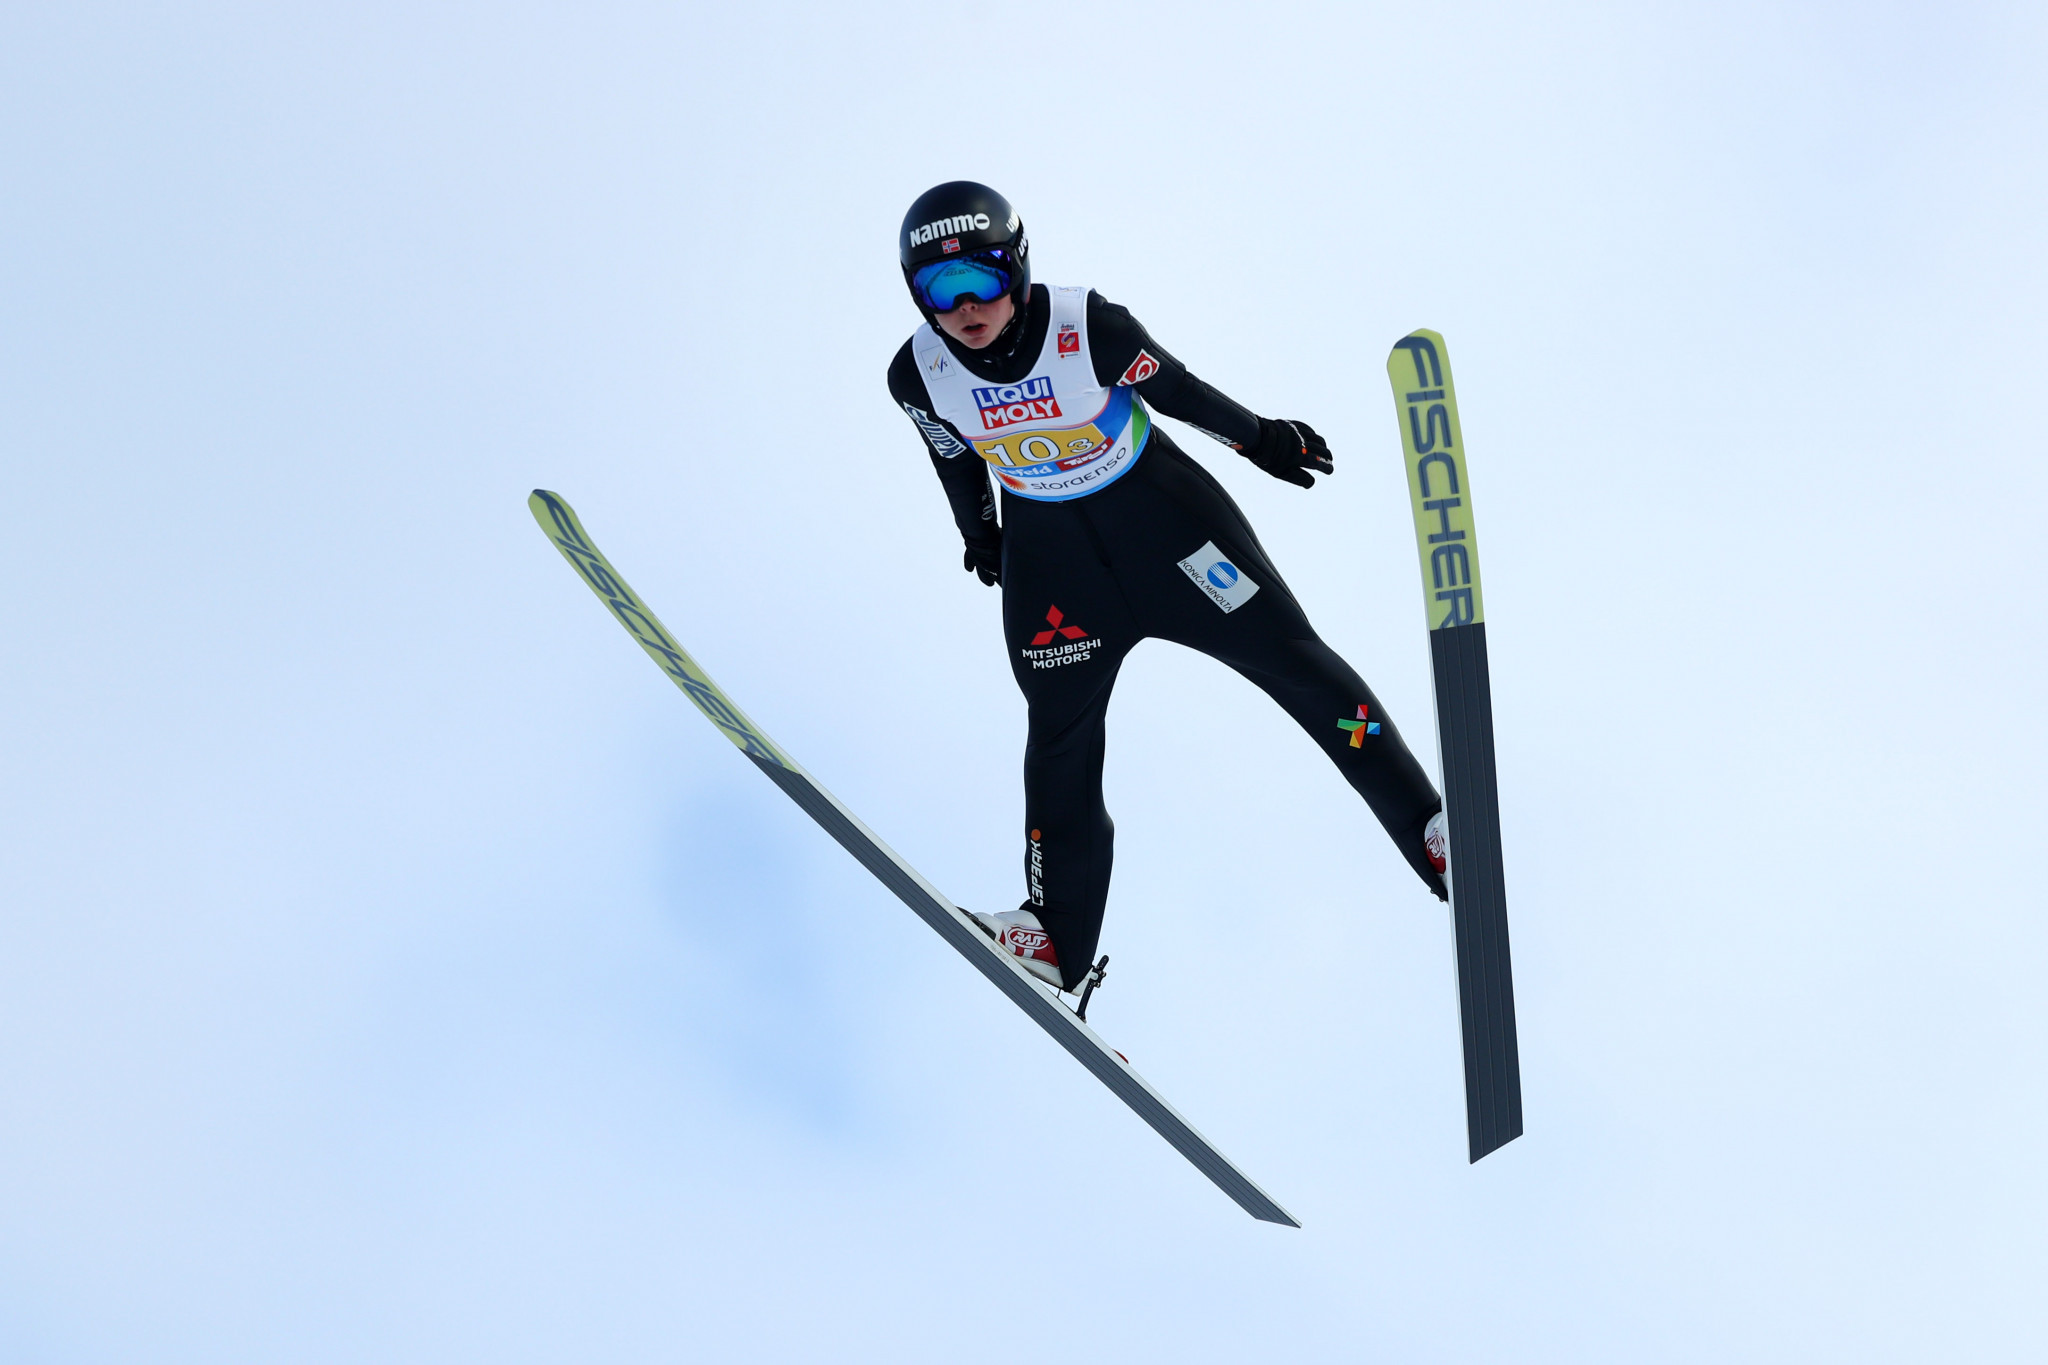 Norway's Maren Lundby took the FIS Ski Jumping World Cup title after her second place finish in Nizhny Tagil ©Getty Images